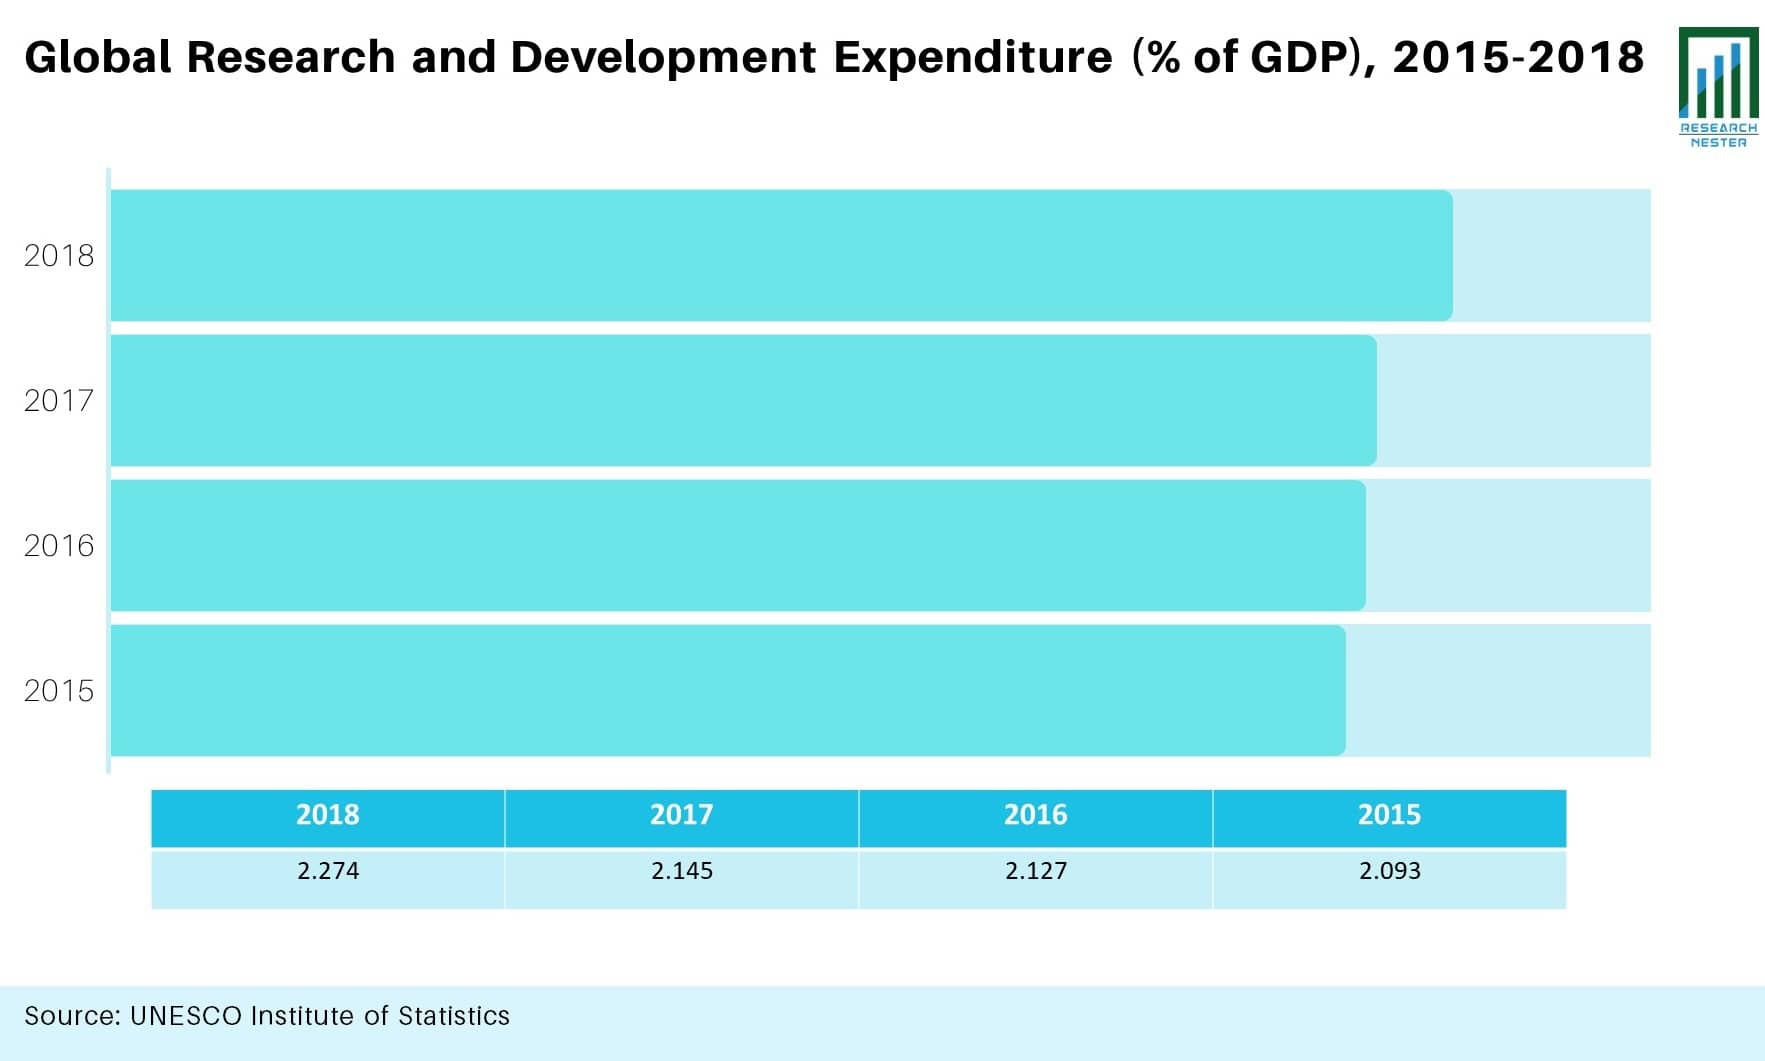  Global Research and Development Expenditure